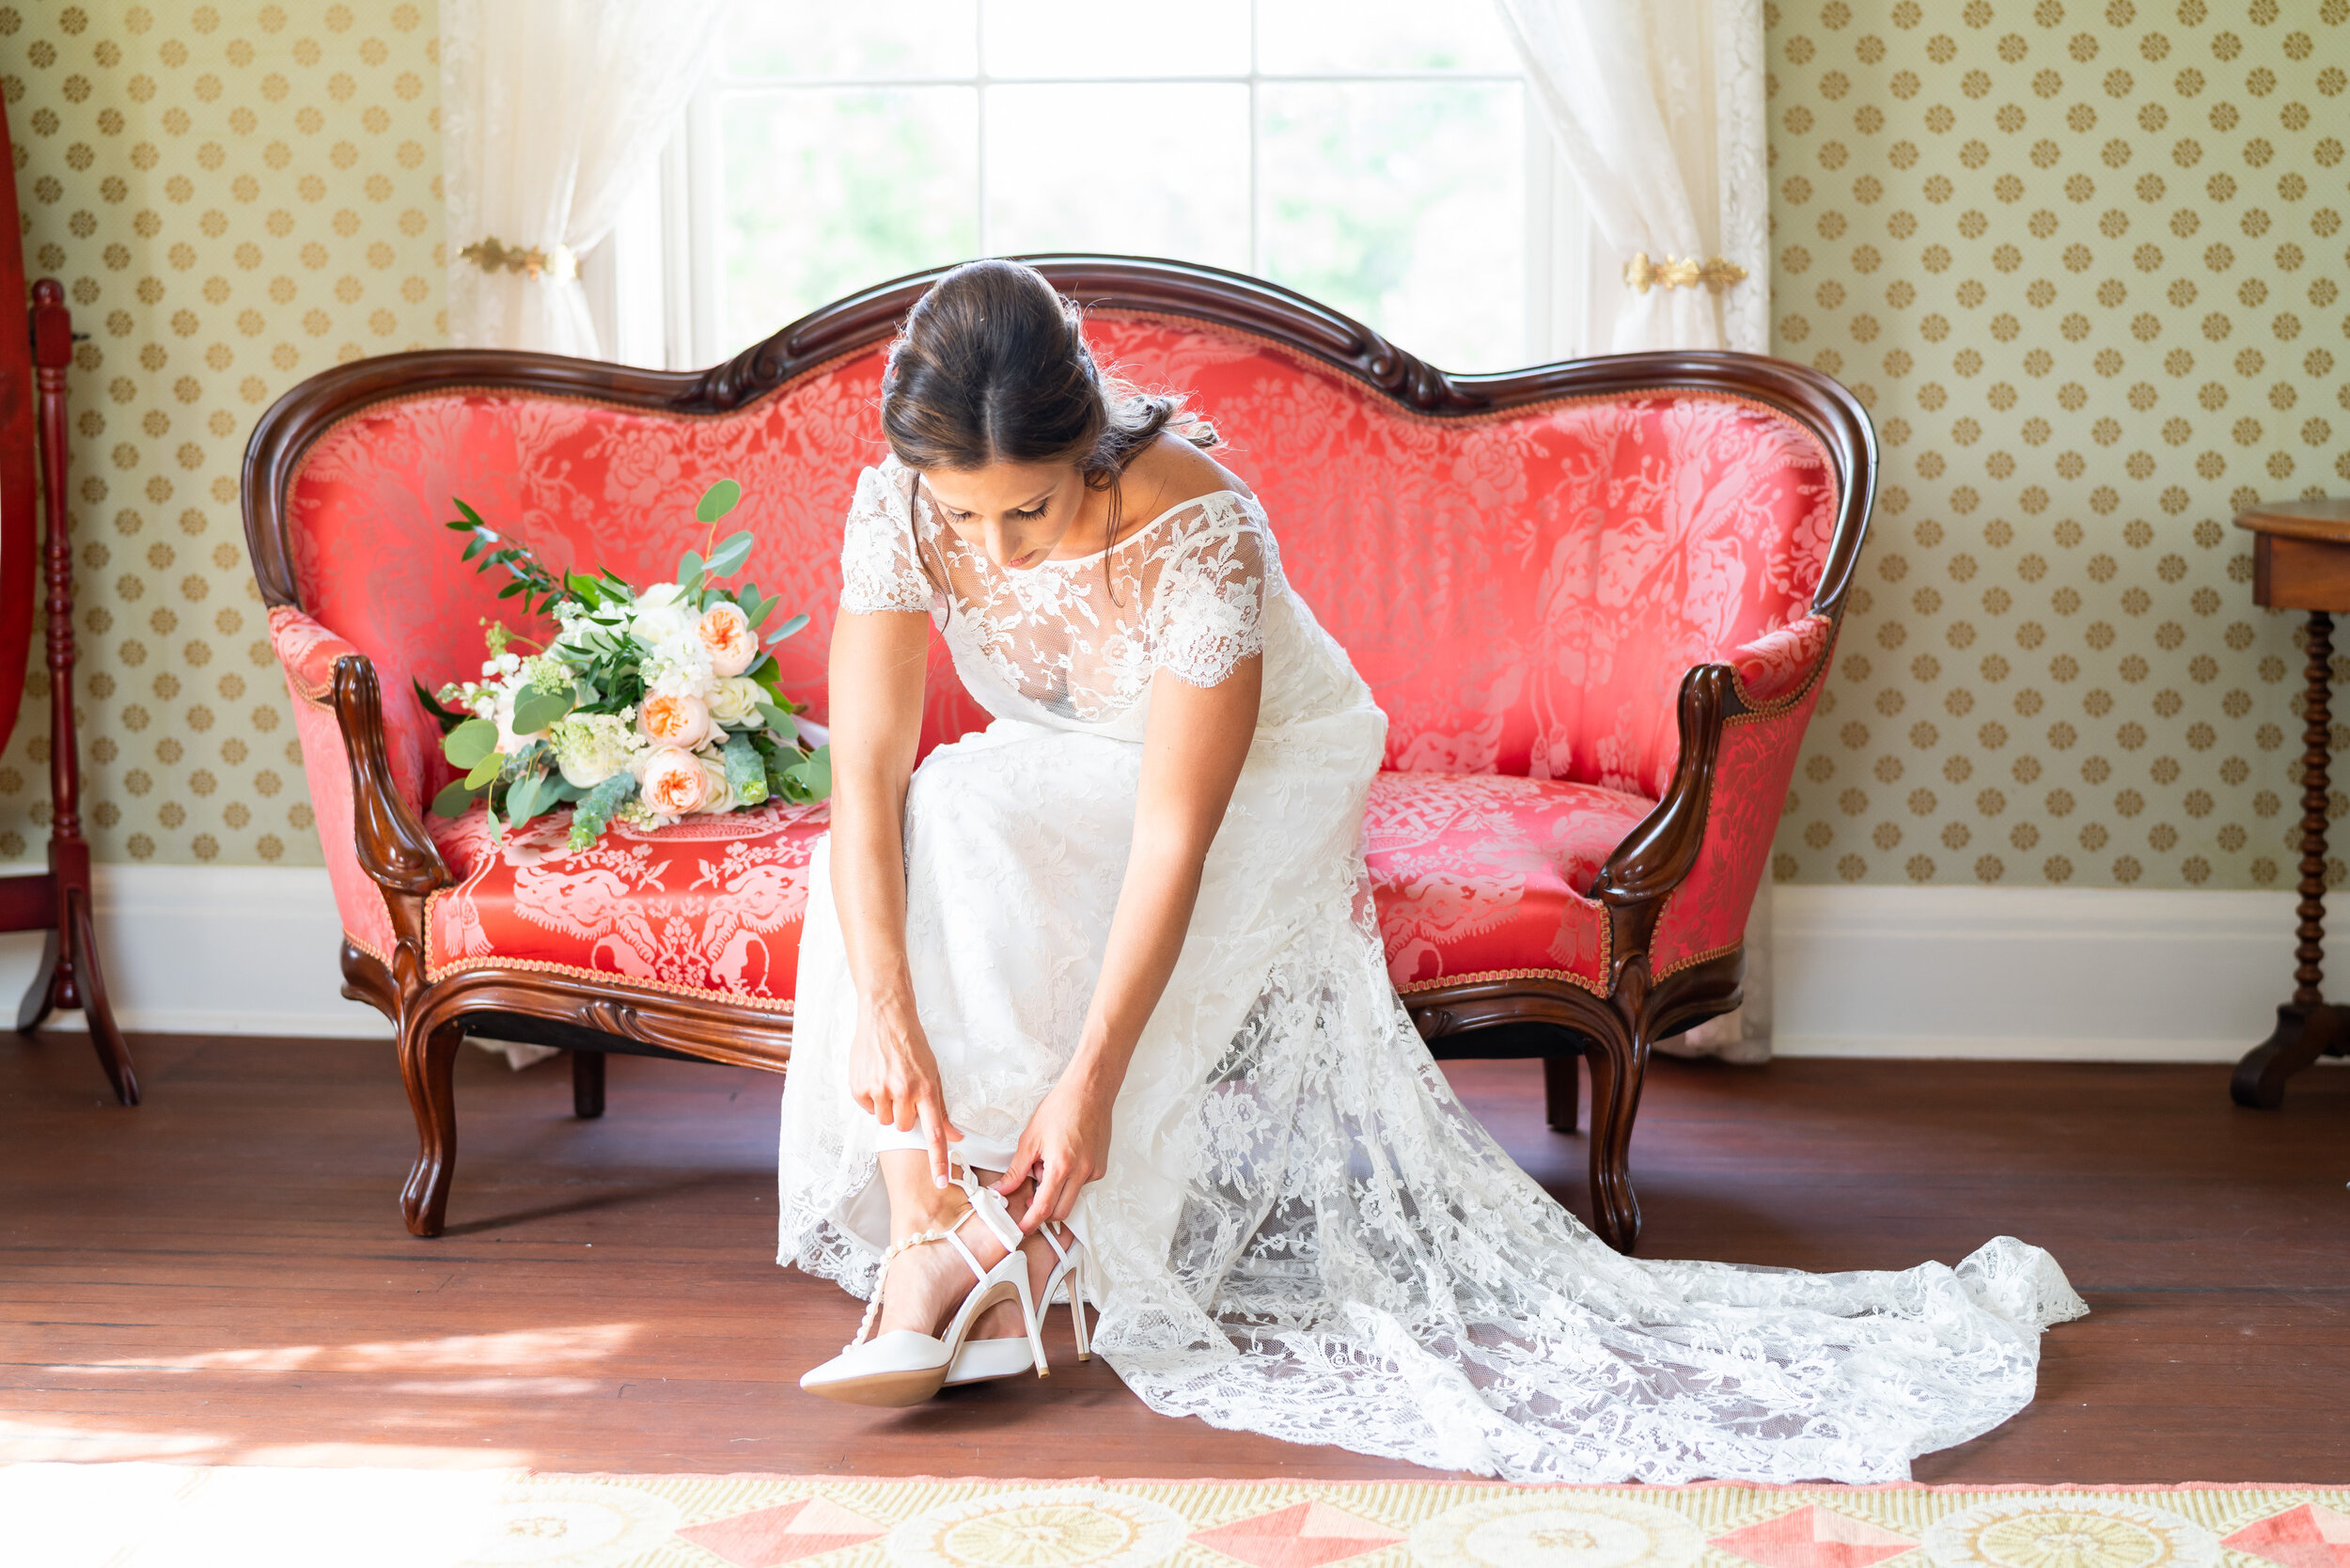 Bride tying Bella Belle shoes at President Lincoln's Cottage wedding